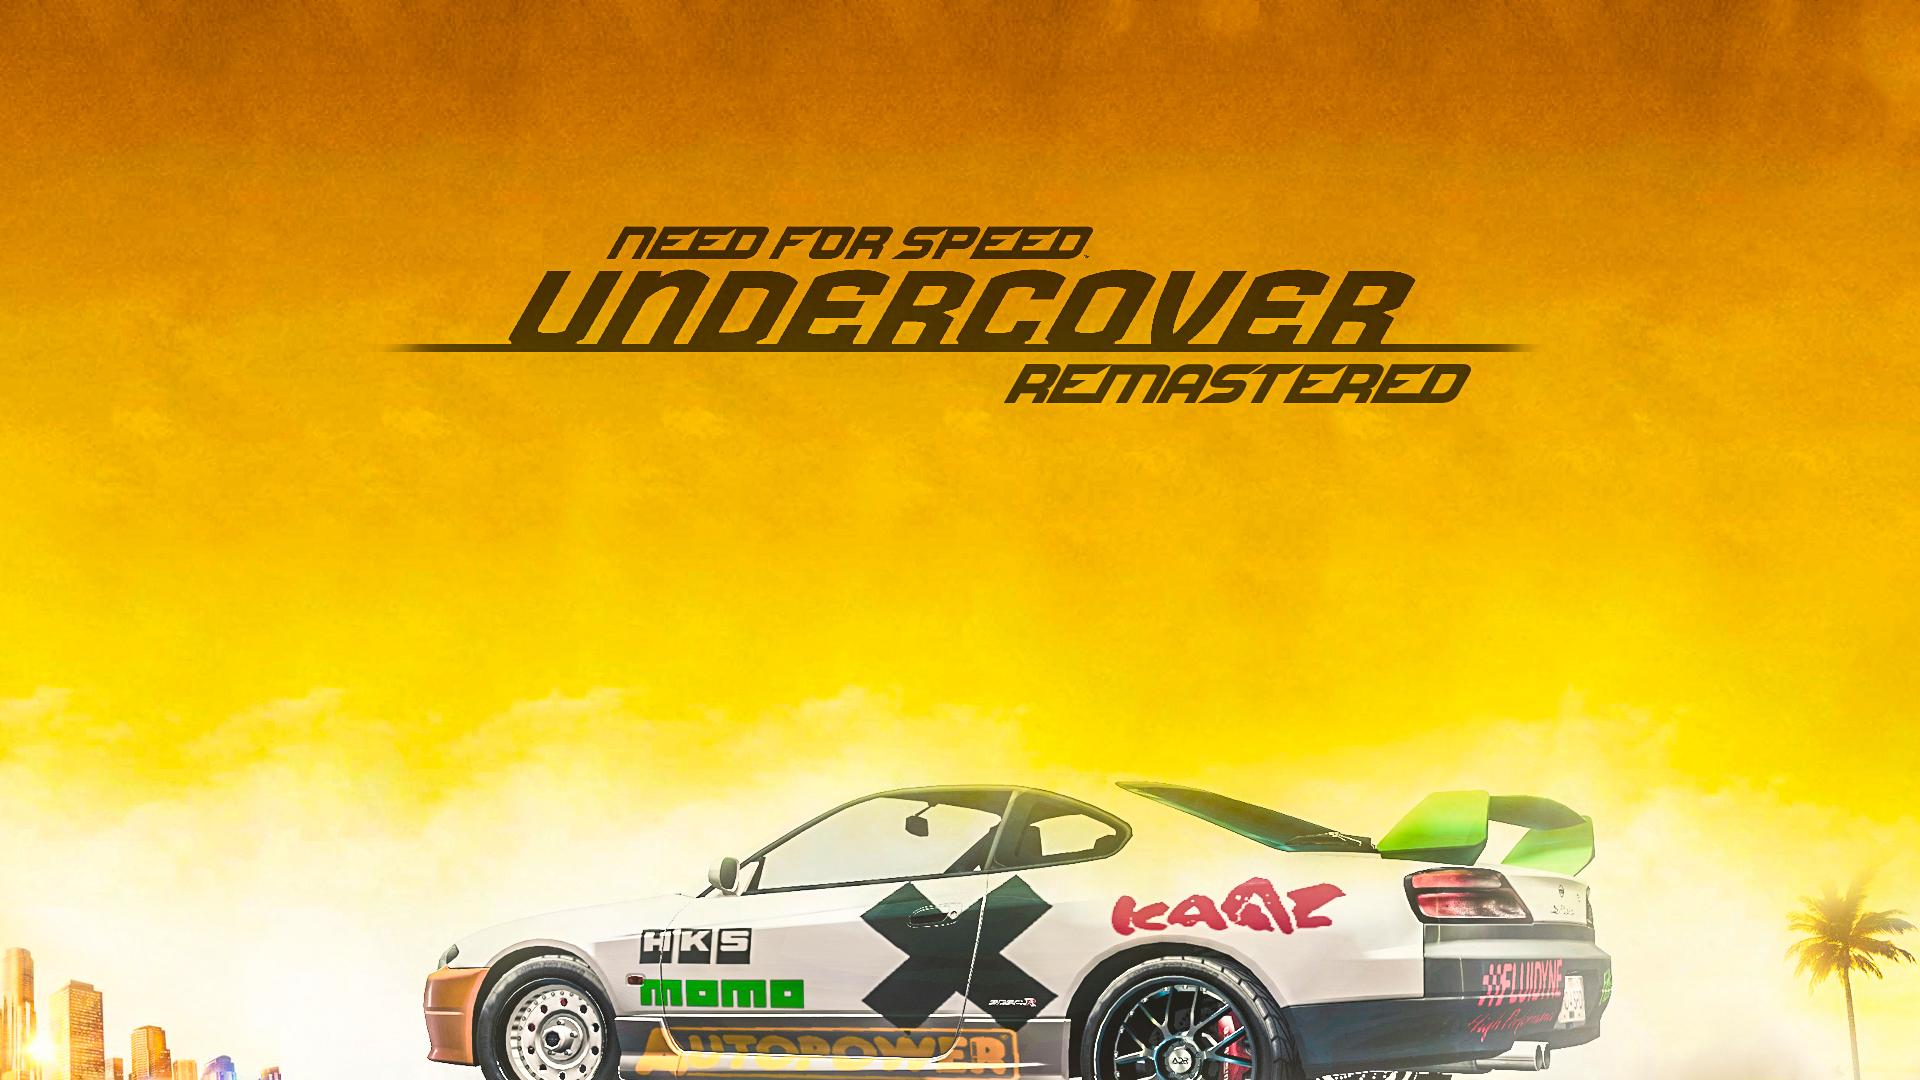 Need for speed undercover zip file download